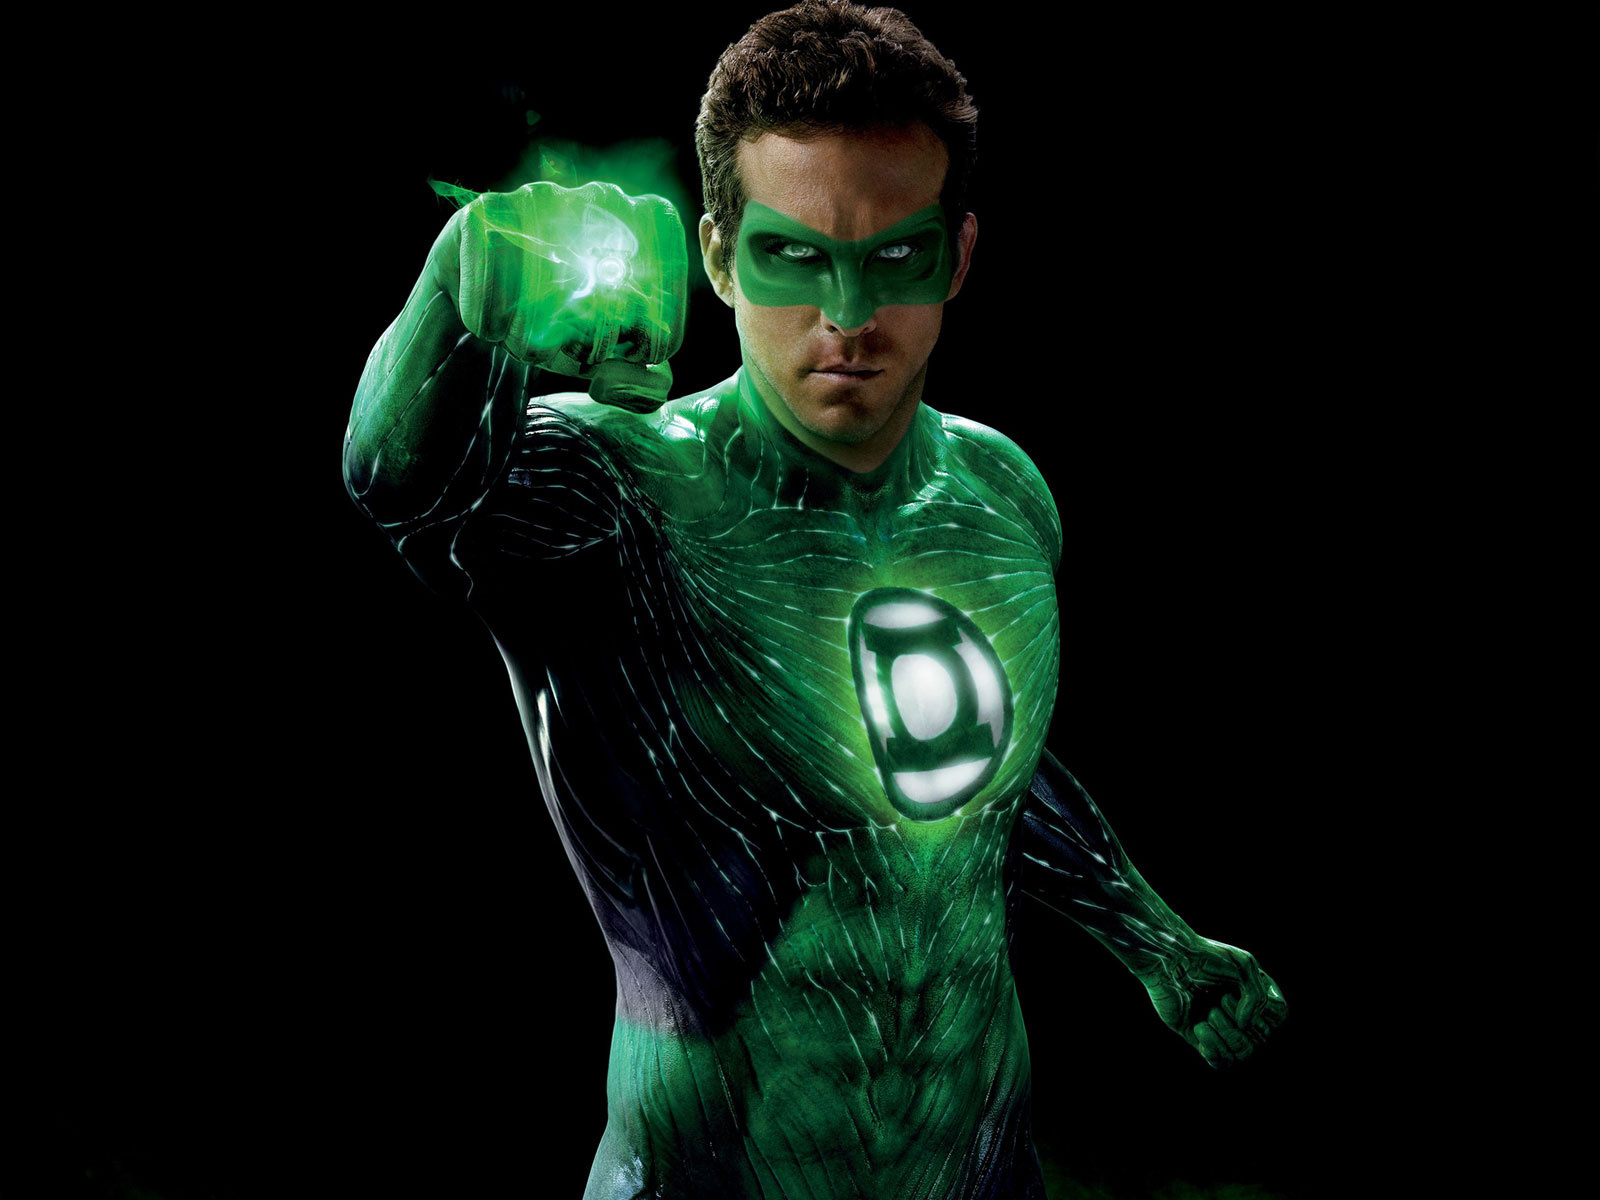 THE WHOLE WORLD IS INSANE!!: GREEN LANTERN IS NOW A GAY SUPERHERO